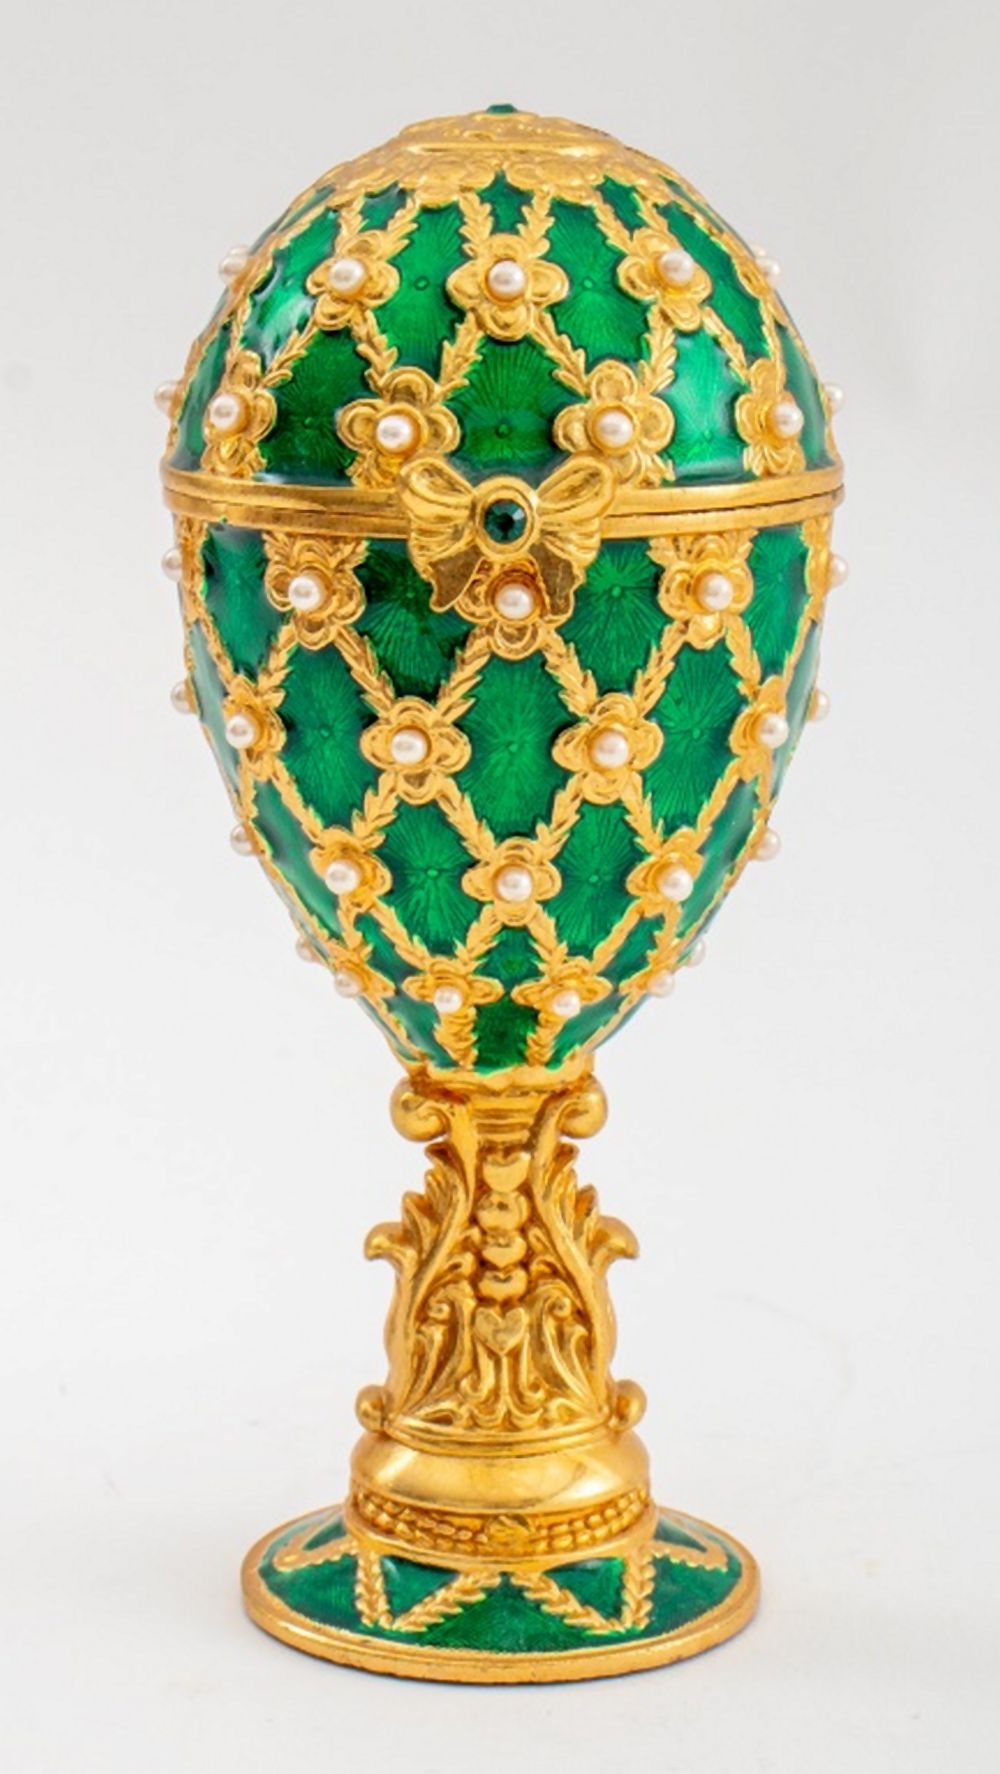 FABERGE STYLE GREEN EASTER EGG